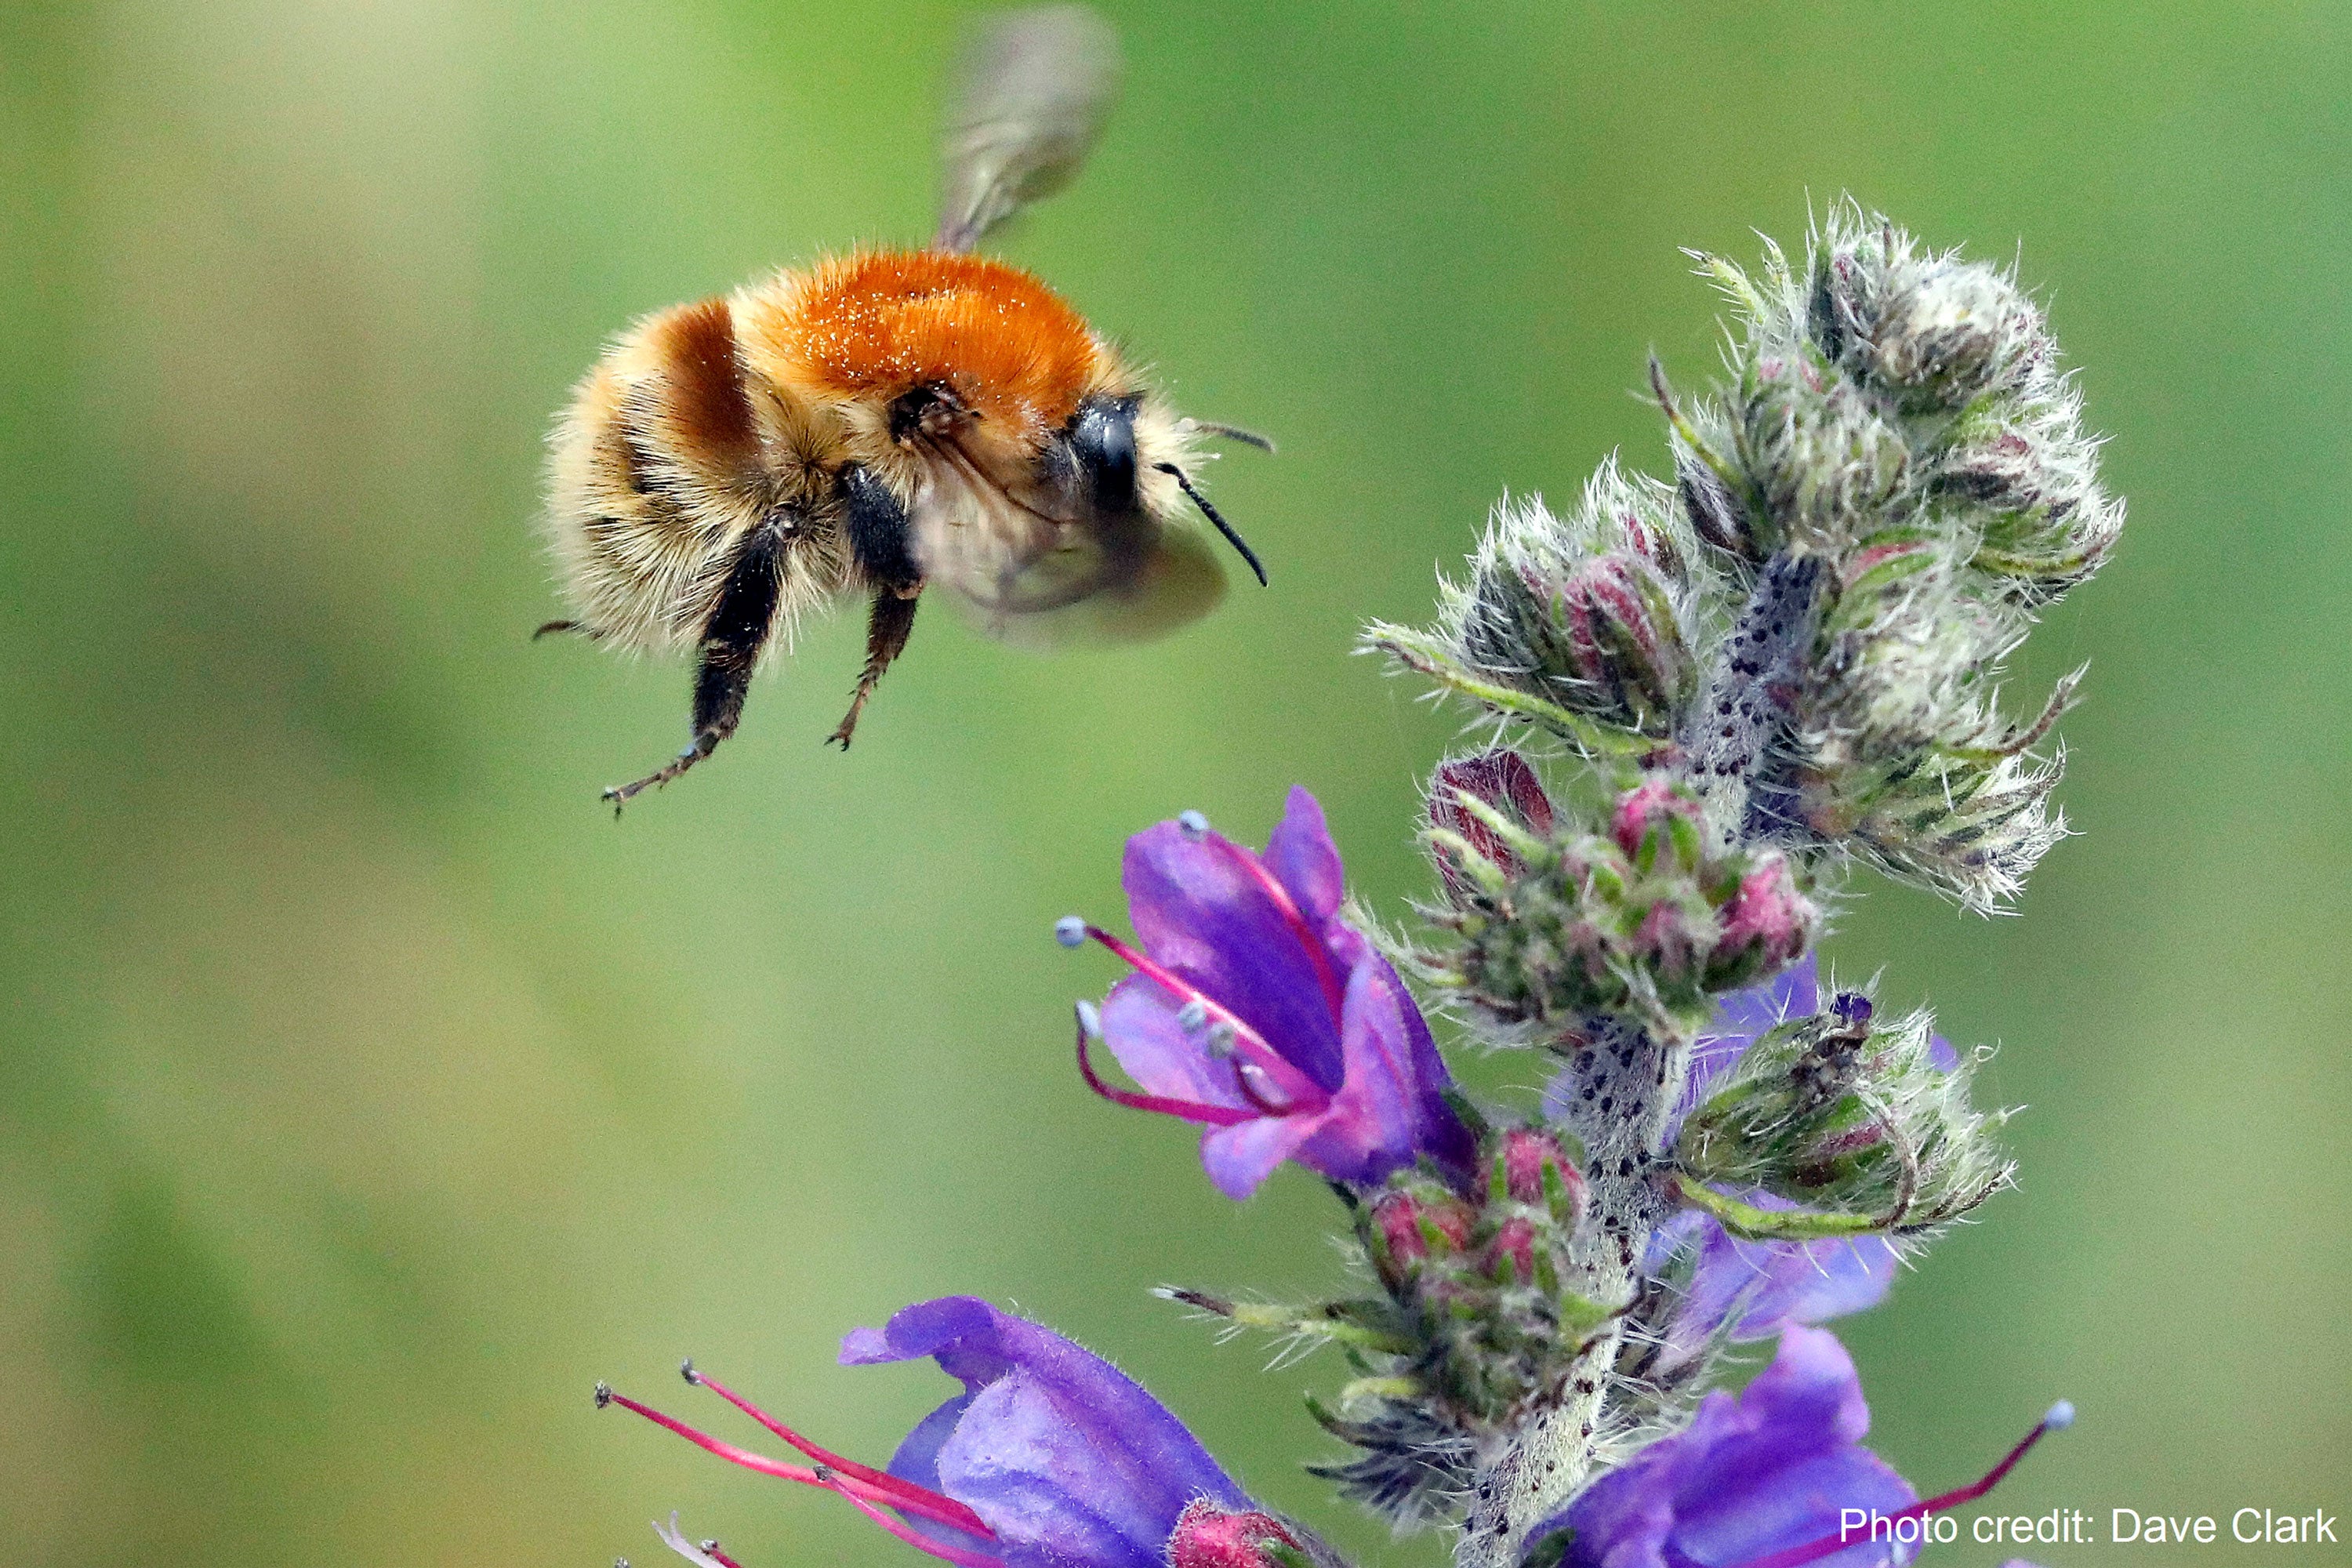 A brown-banded carder bee in flight